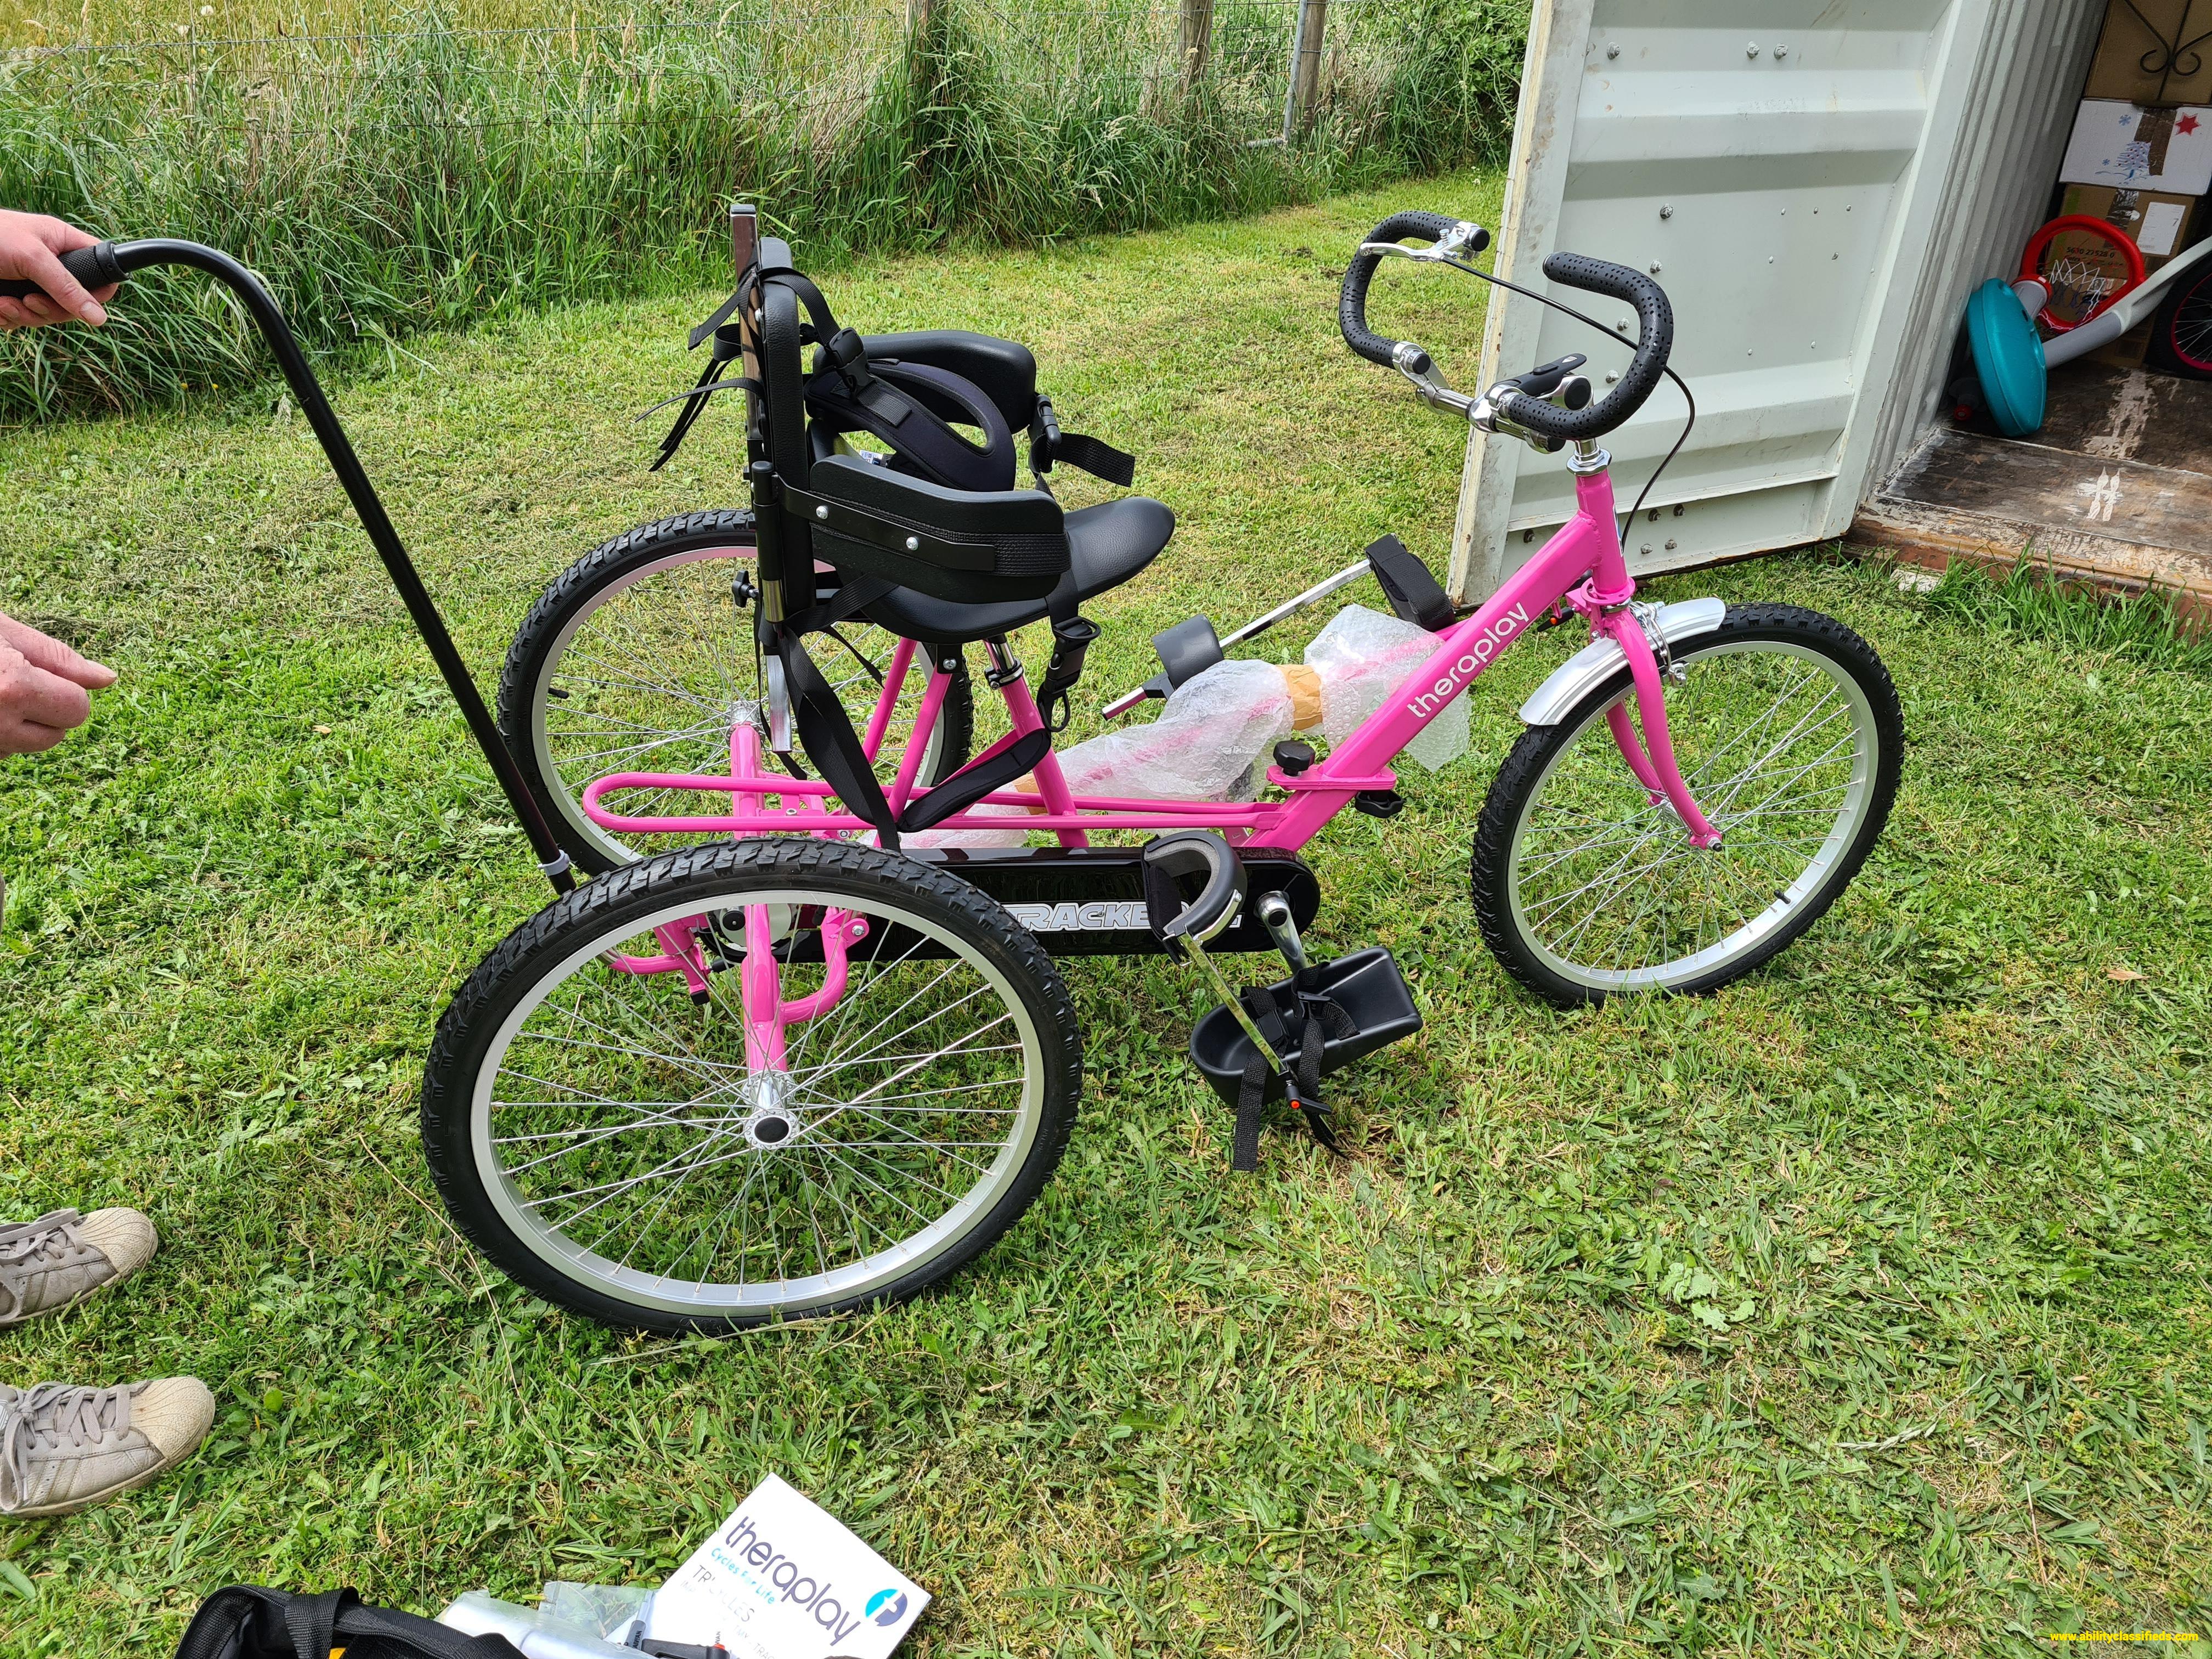 Theraplay trike